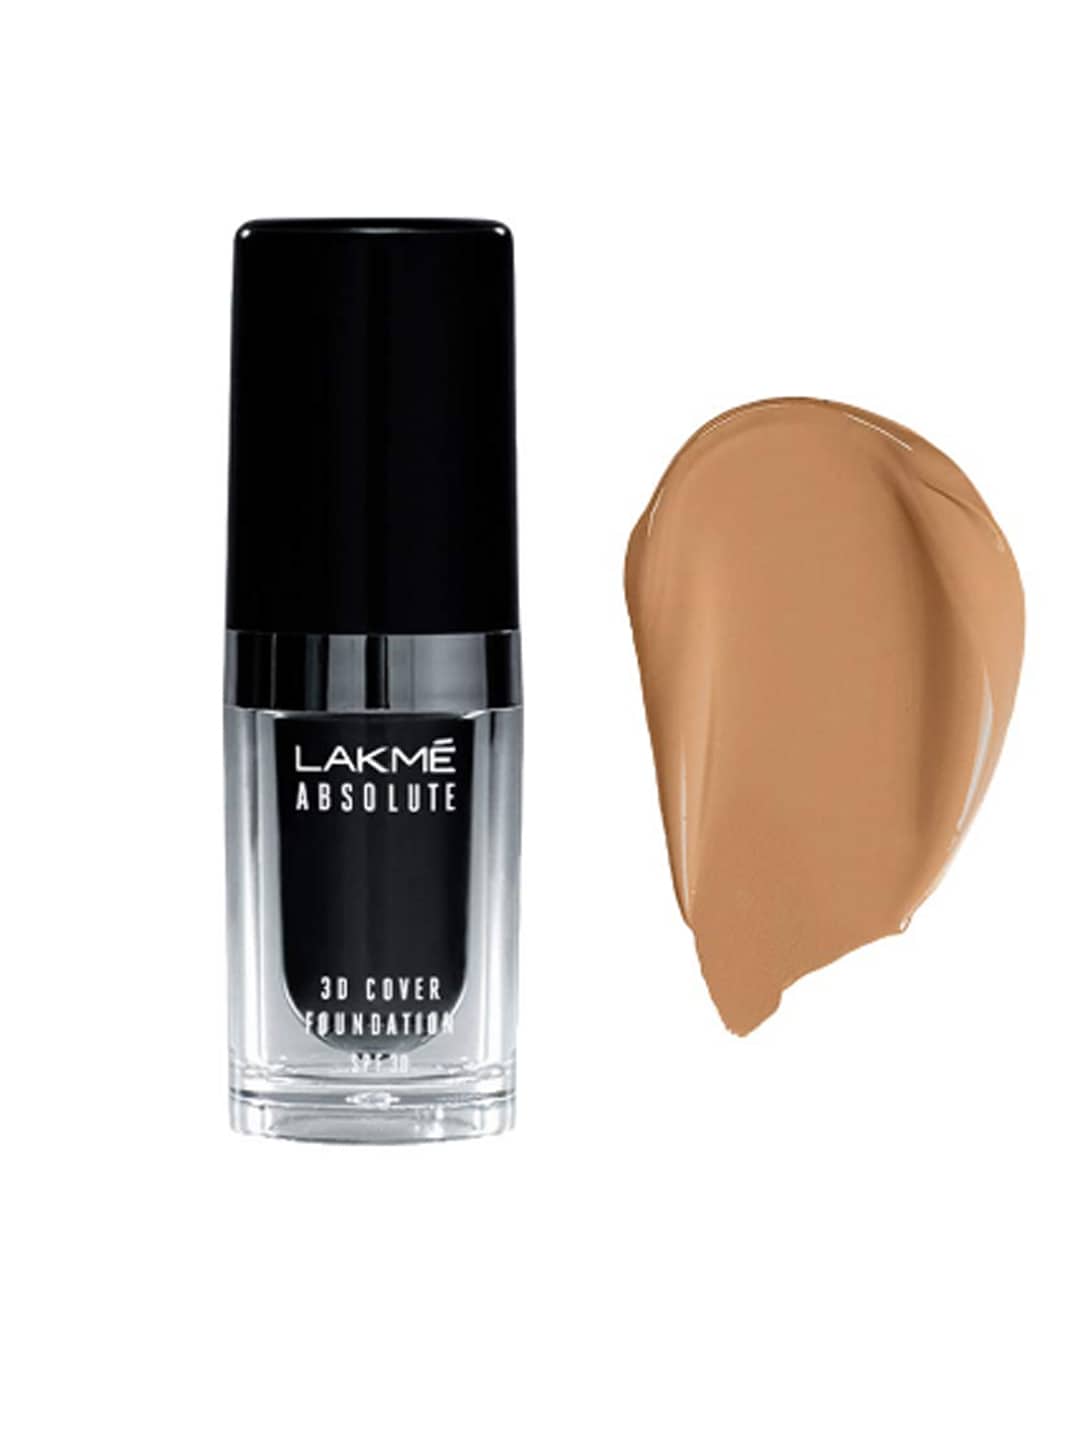 Lakme Absolute 3D Cover SPF 30 Foundation- Cool Walnut C380 Price in India